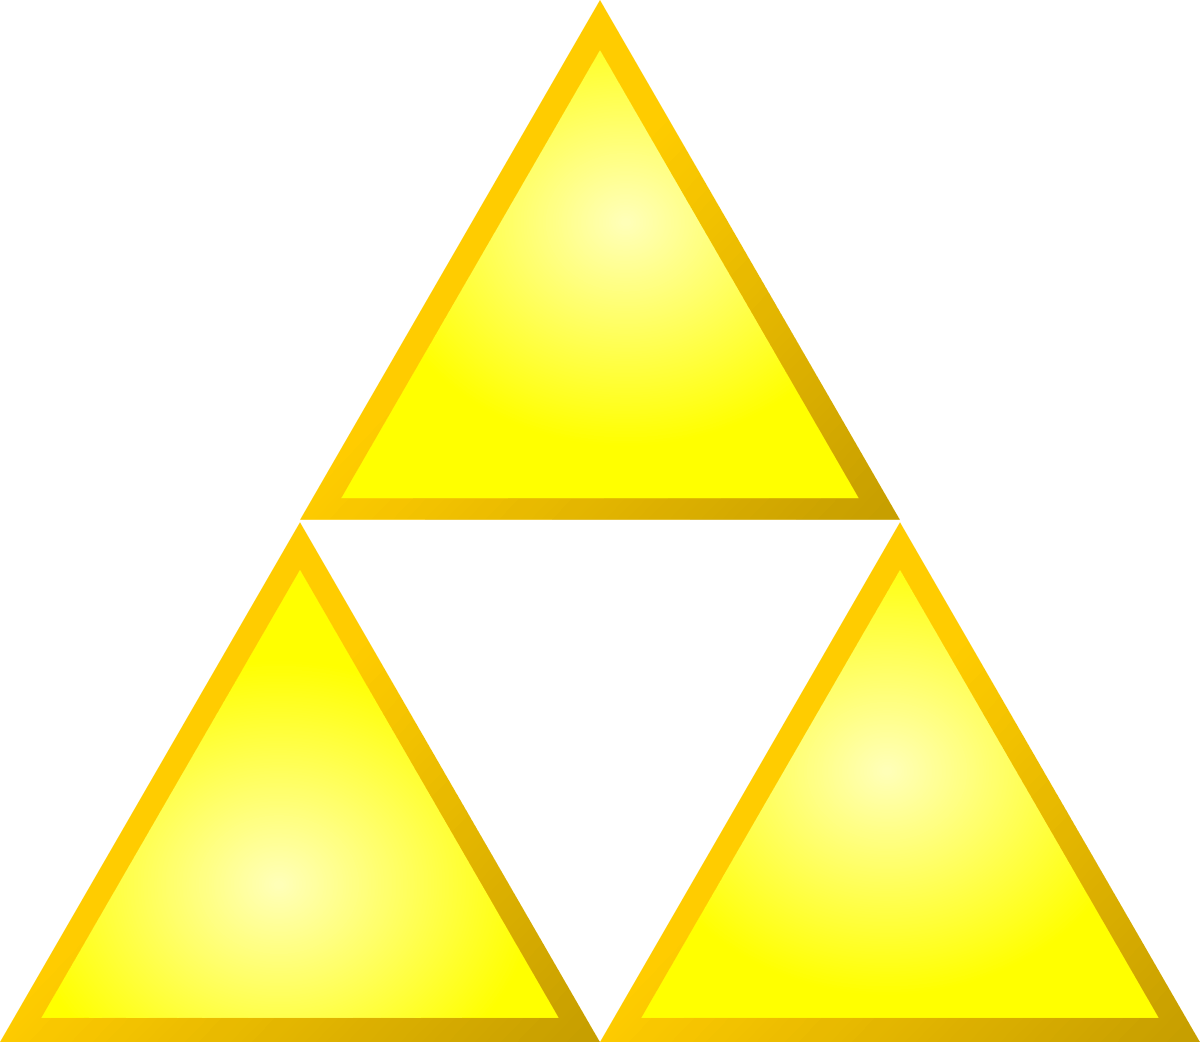 Over a Yellow Triangle Logo - Triforce